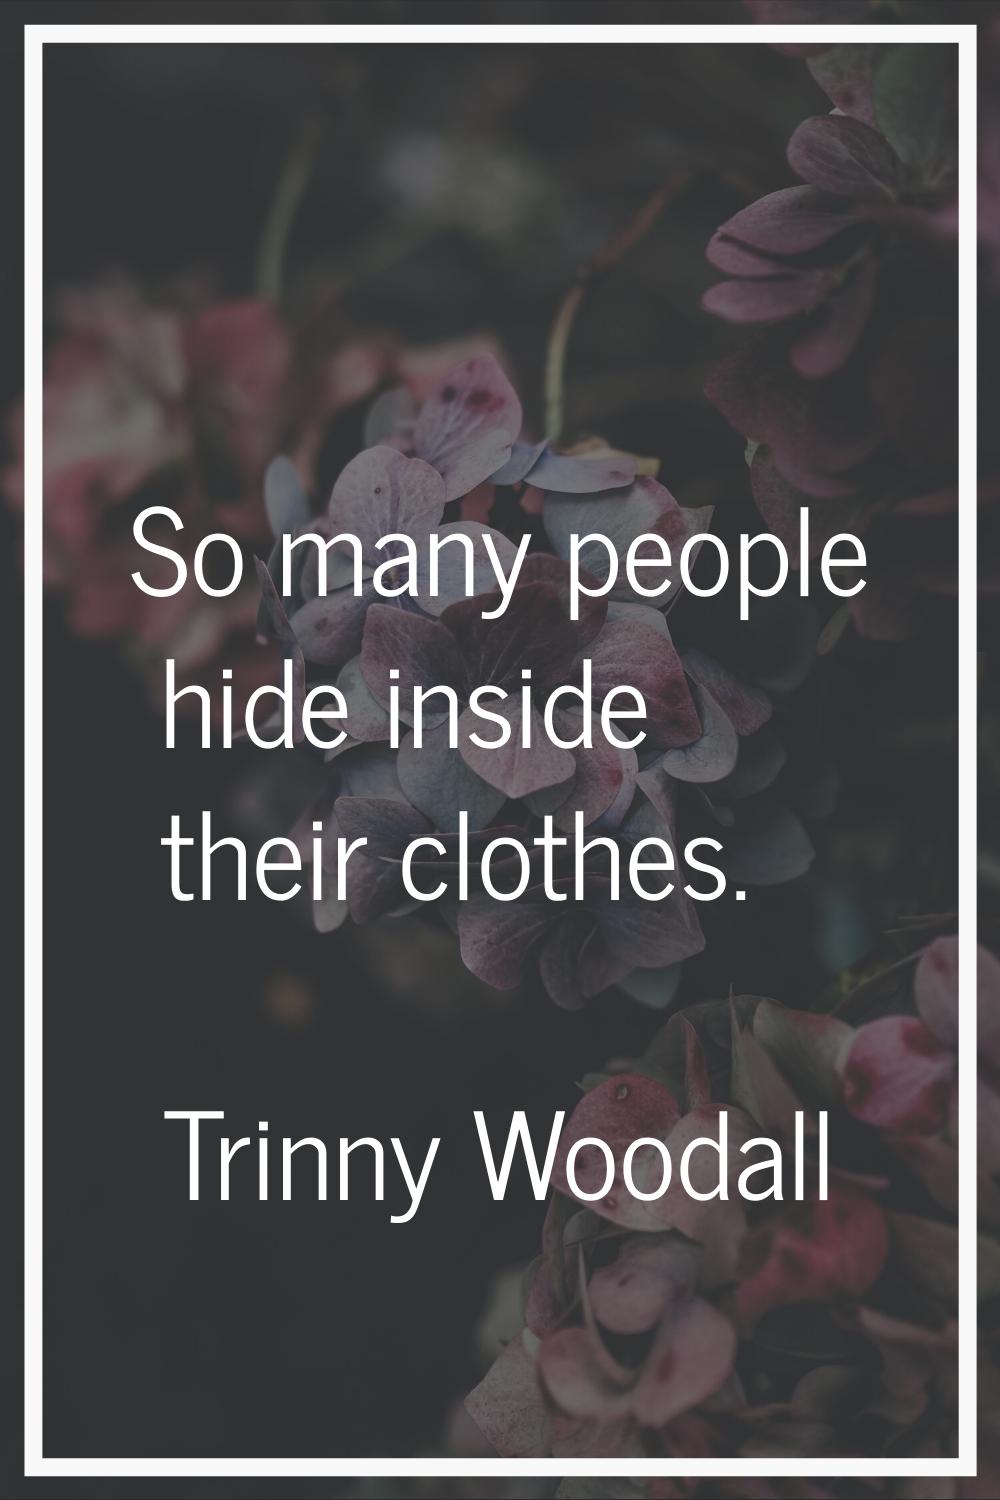 So many people hide inside their clothes.